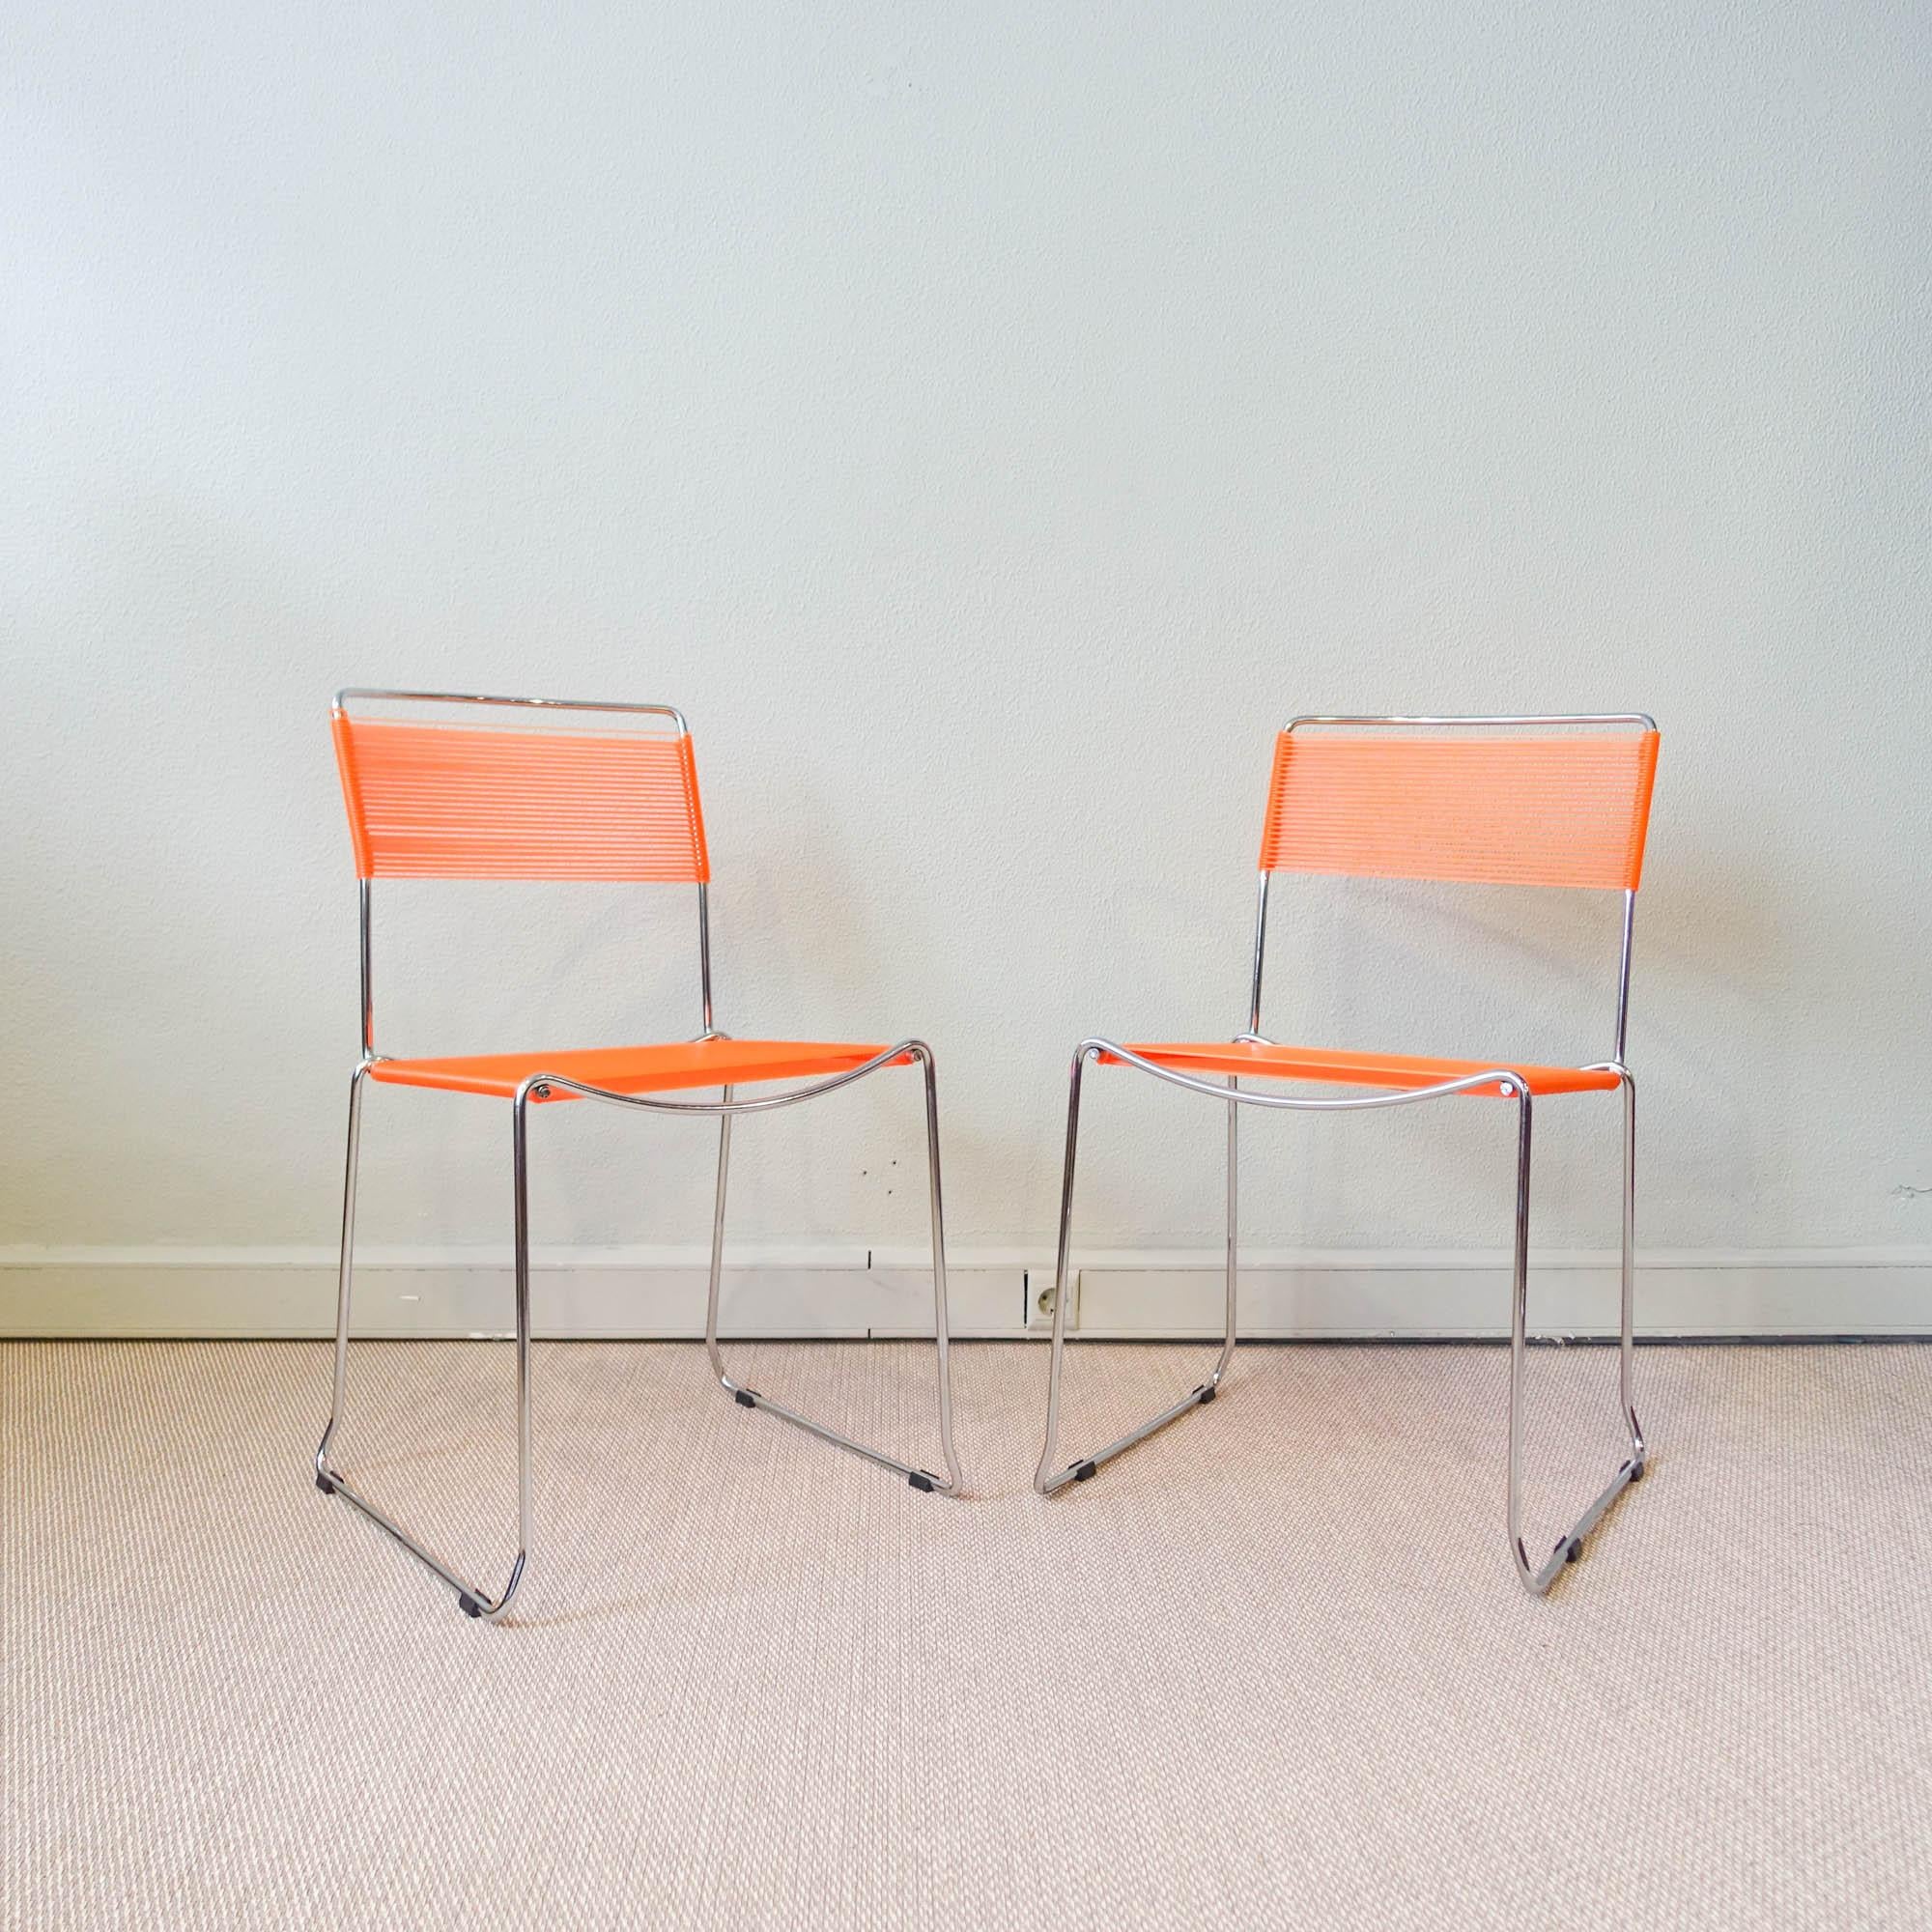 This pair of Spaghetti chairs was designed by Giandomenico Belotti for Alias, in Italy, during the 1980's. They have chromed steel frames and orange straps. All PVC straps are still not torn or worn out. 
